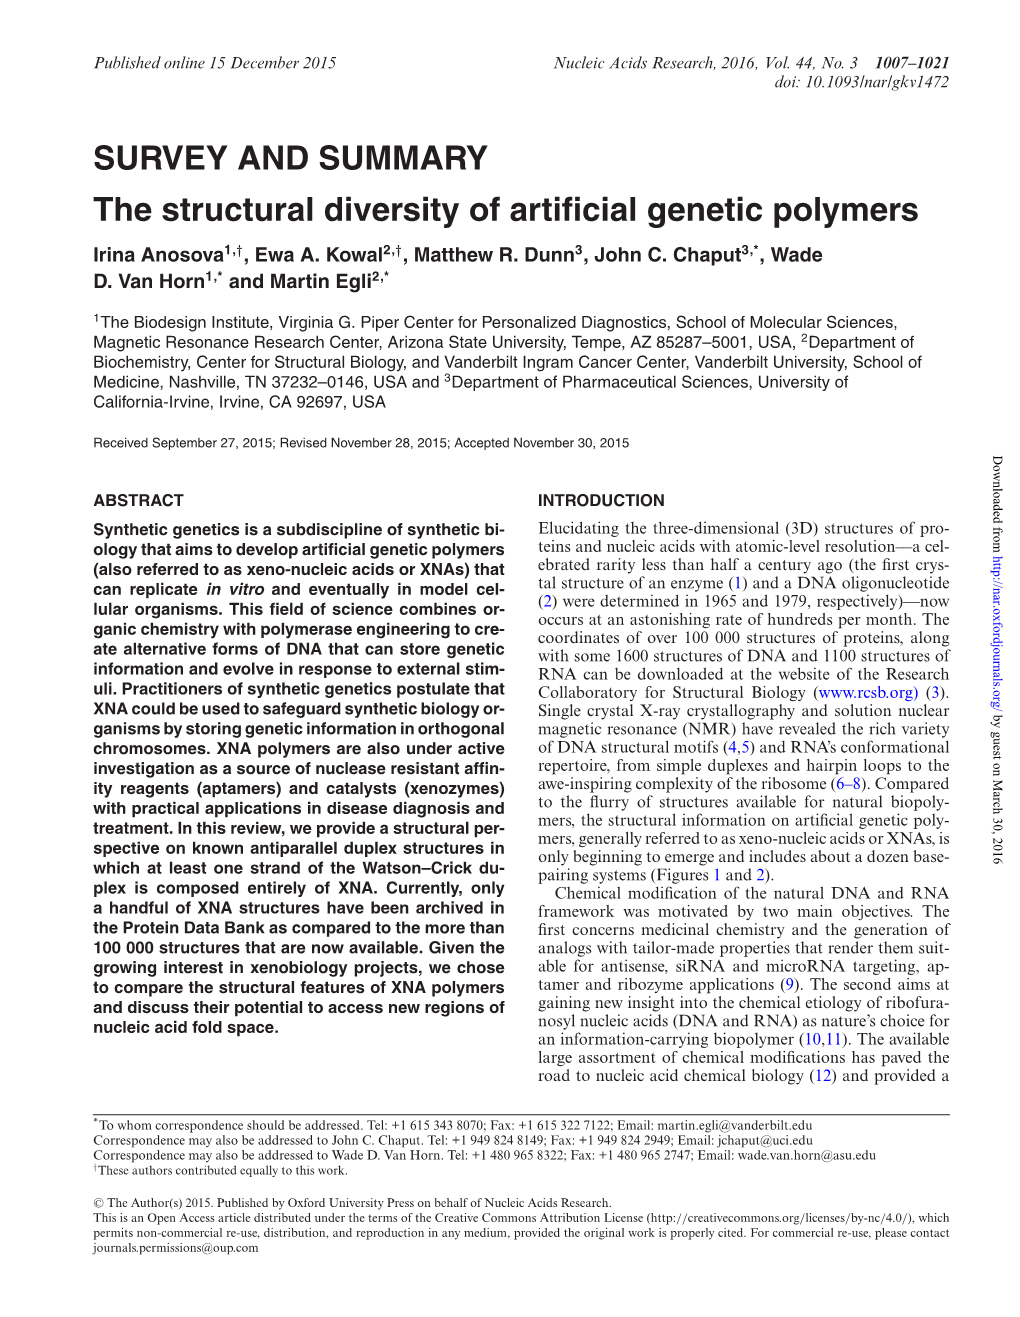 The Structural Diversity of Artificial Genetic Polymers